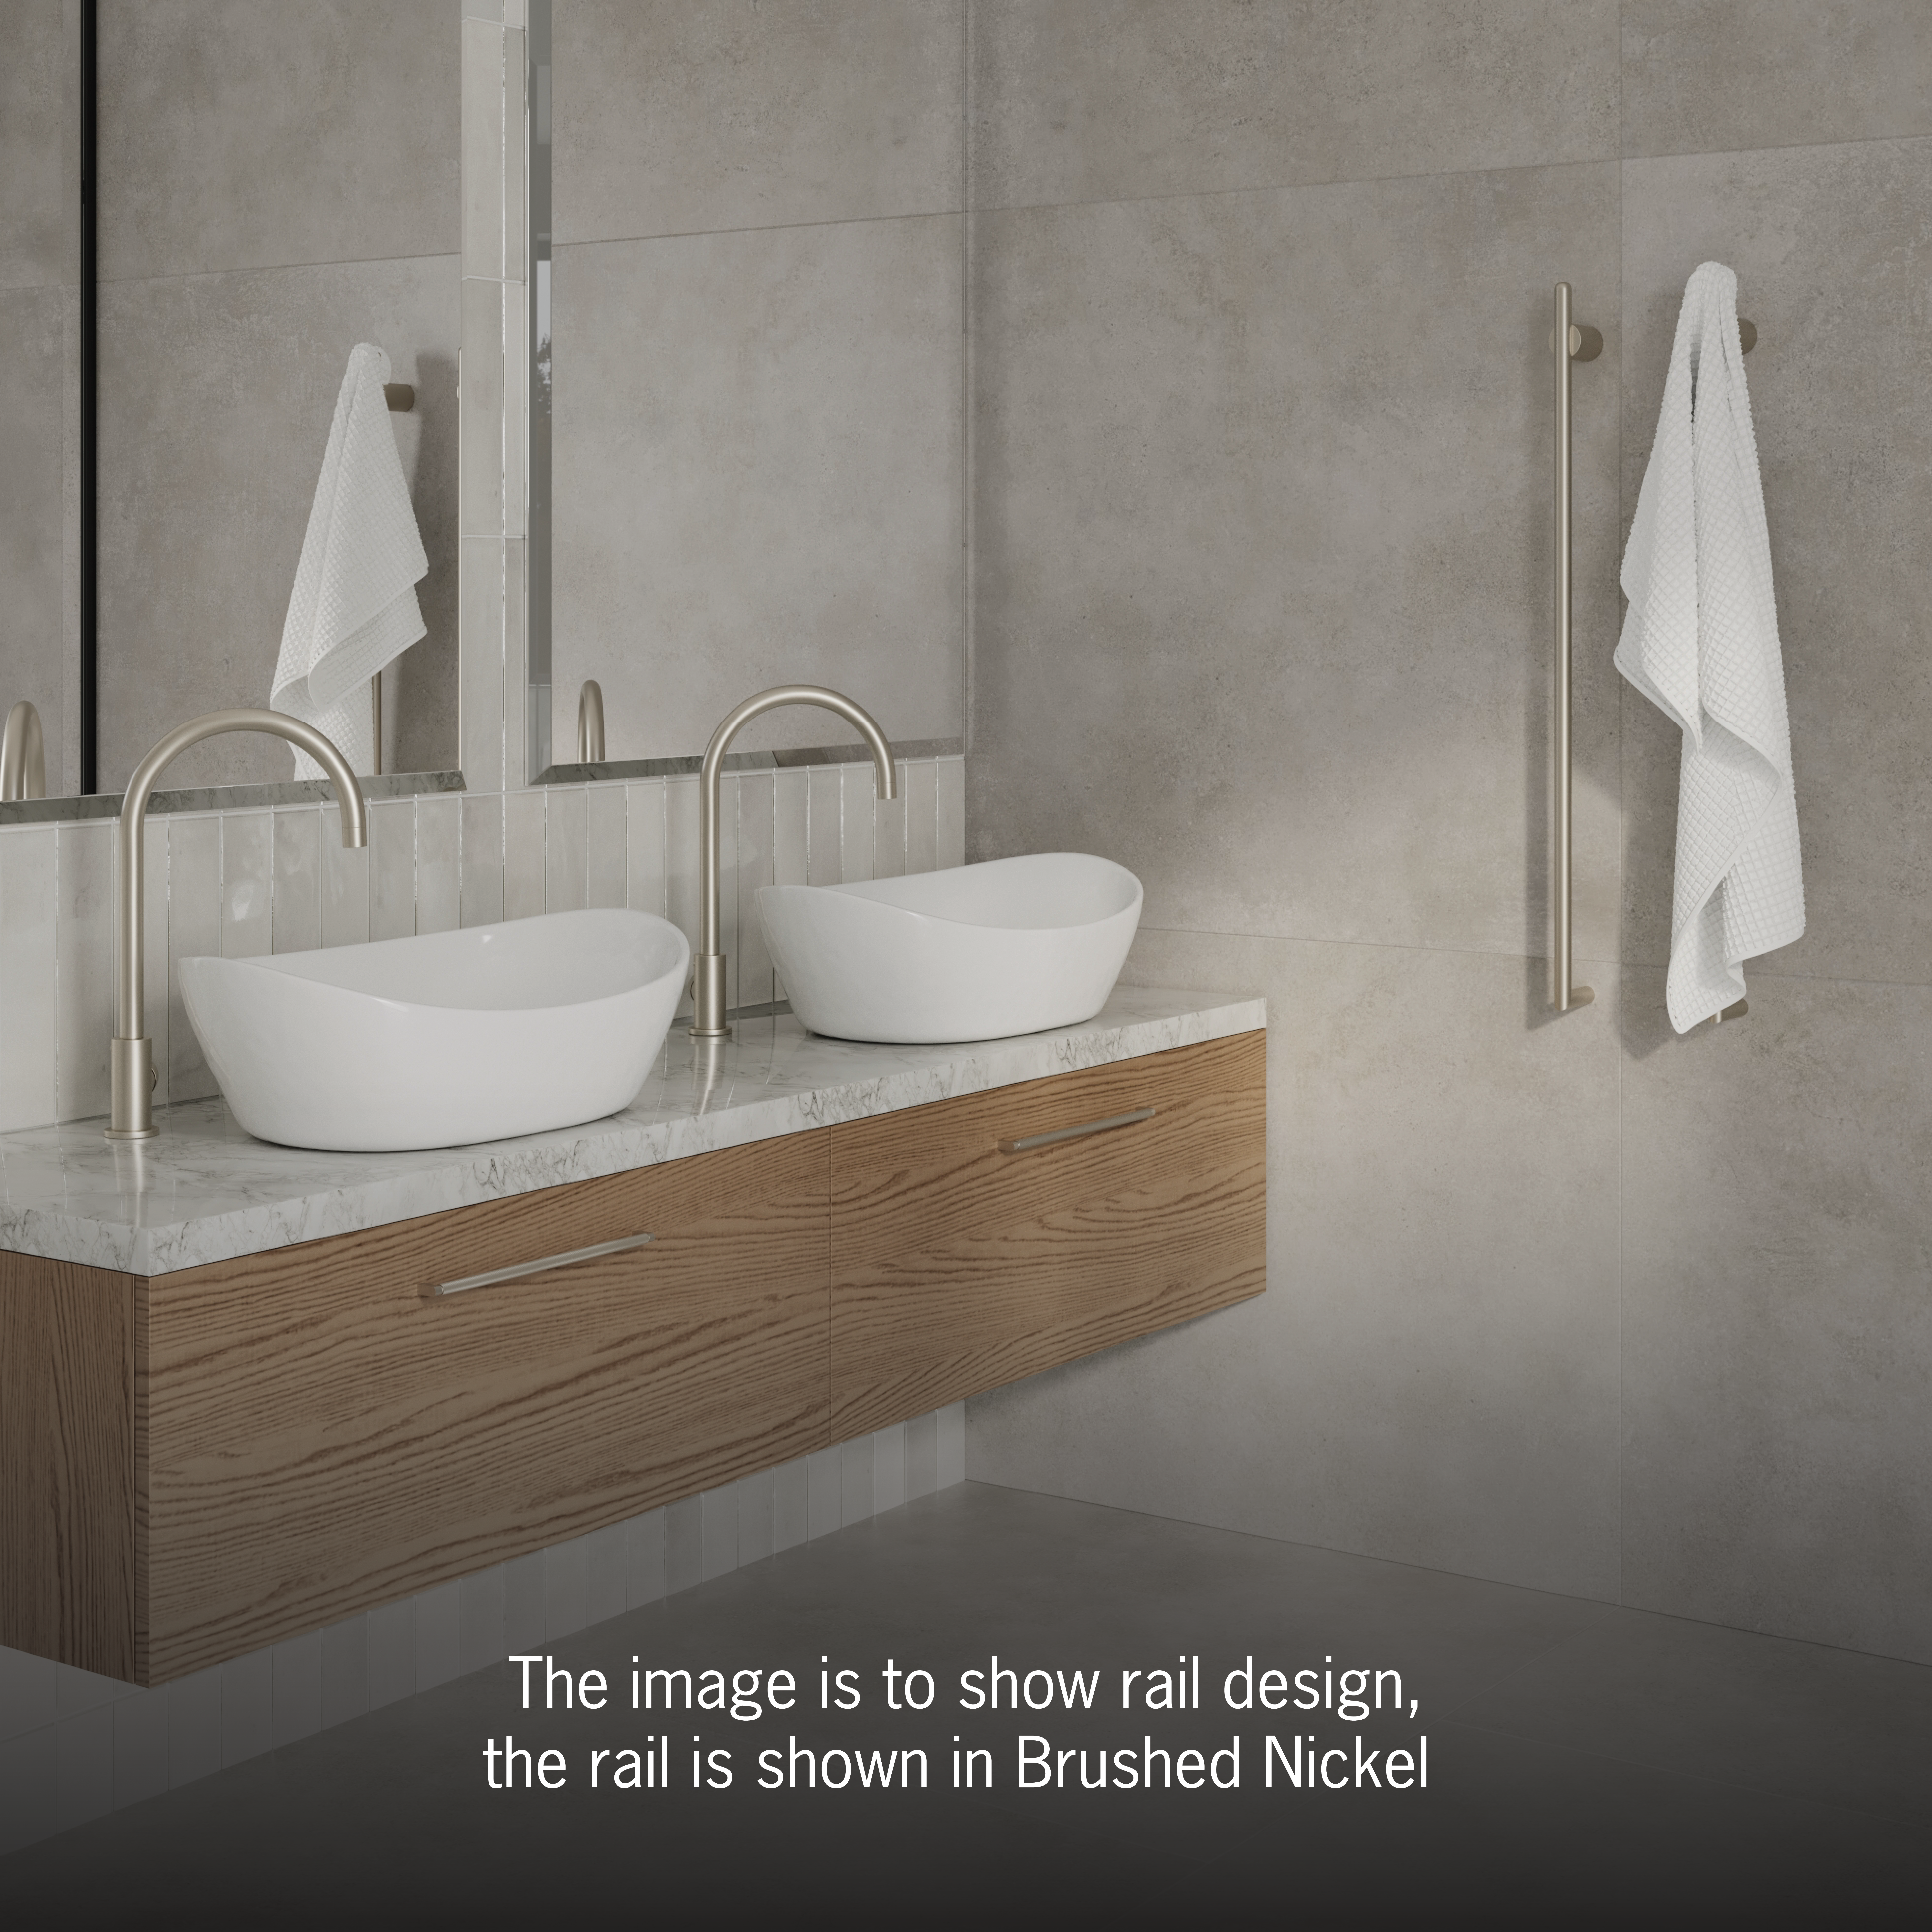 Infinity Plus bathrooms that offer the full range of thermal rail products